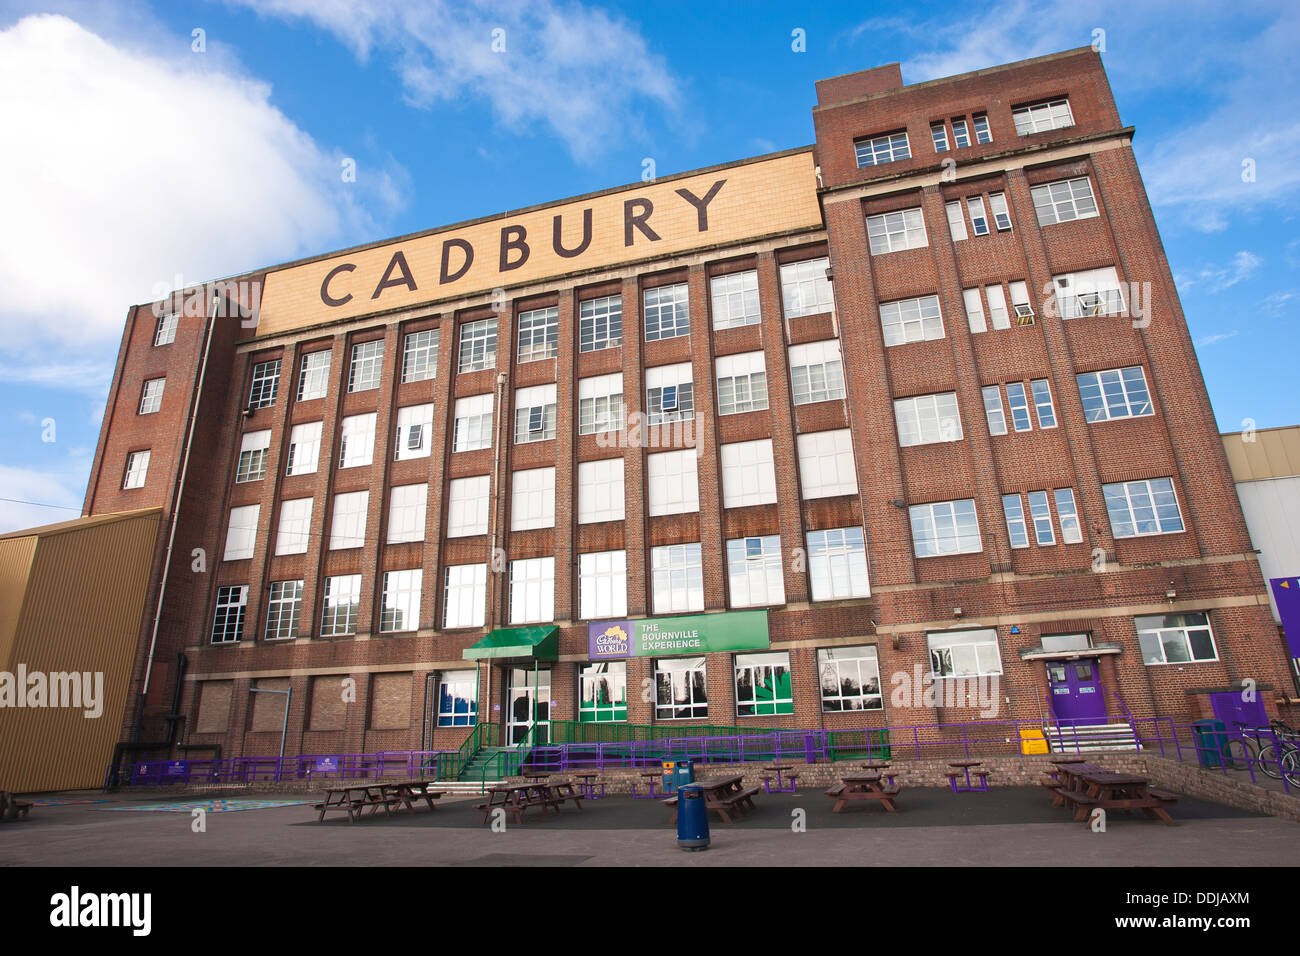 Bournville Village, the home of the Cadbury chocolate factory founded by George Cadbury in 1879, England, United Kingdom Stock Photo